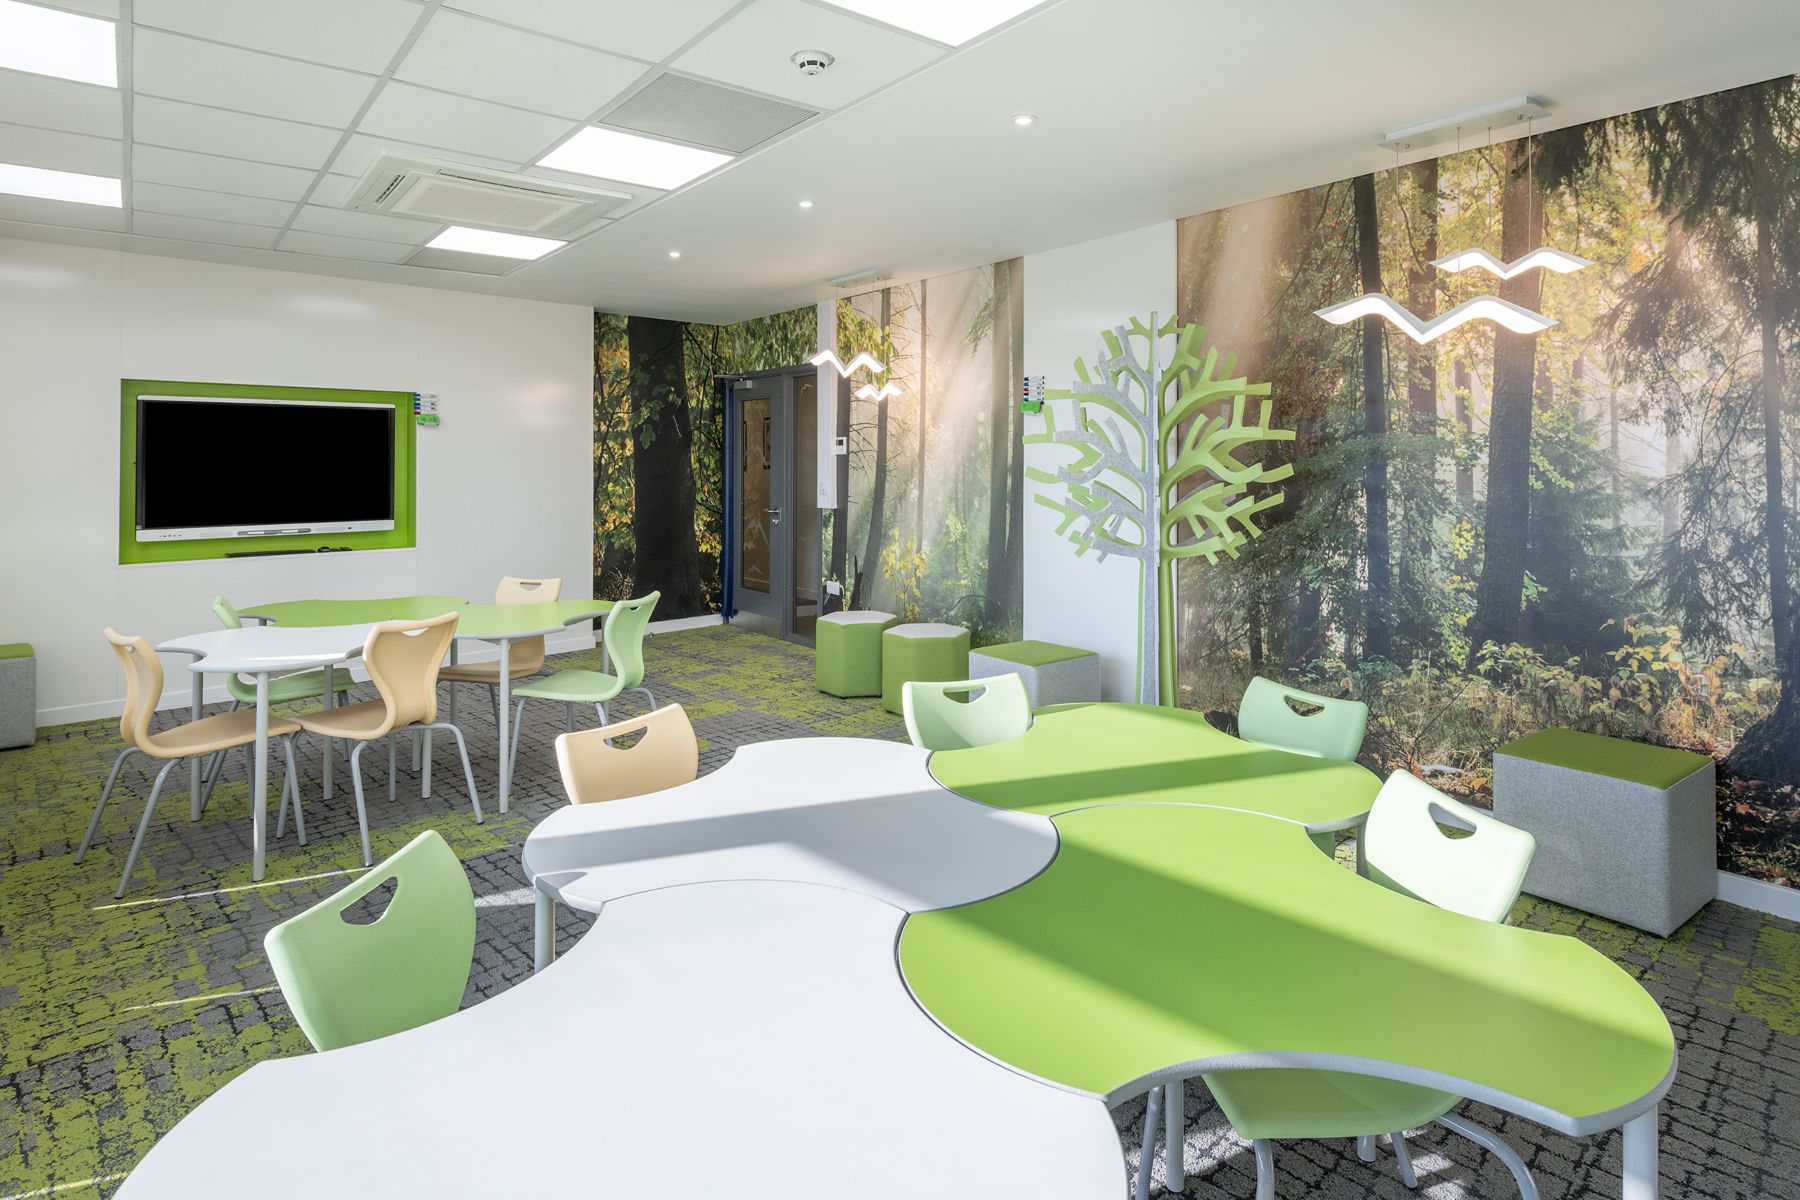 How Educational Facilities Help Independent Schools Attract & Retain Students